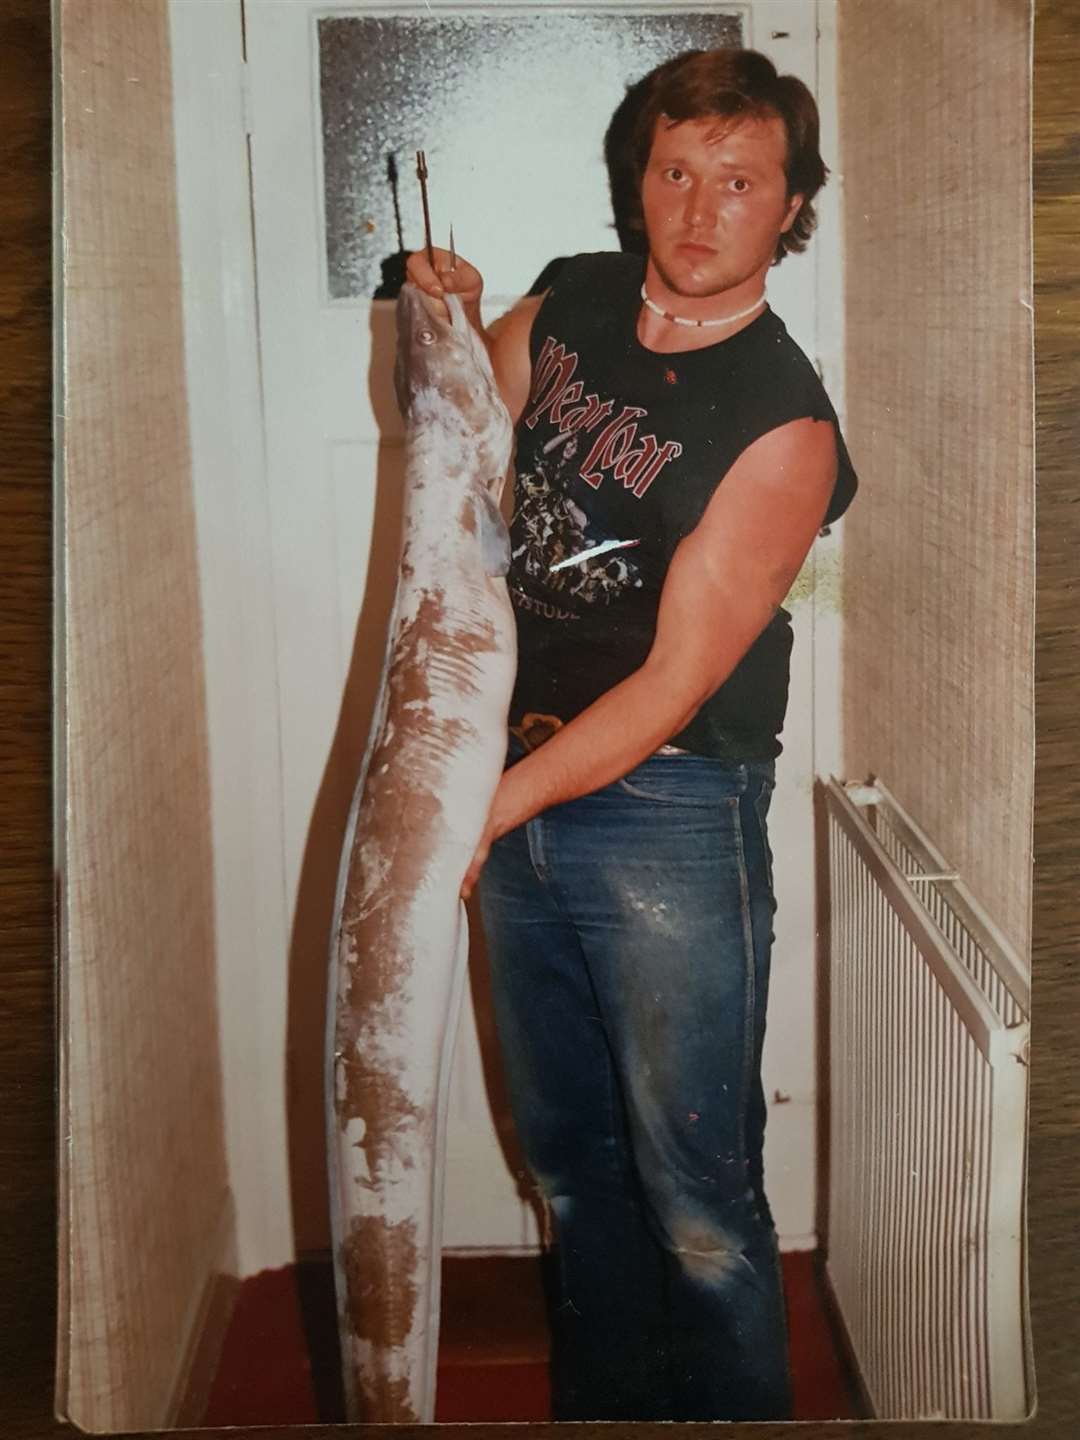 Christopher Young caught a 30lb conger eel on Admiralty Pier in 1987